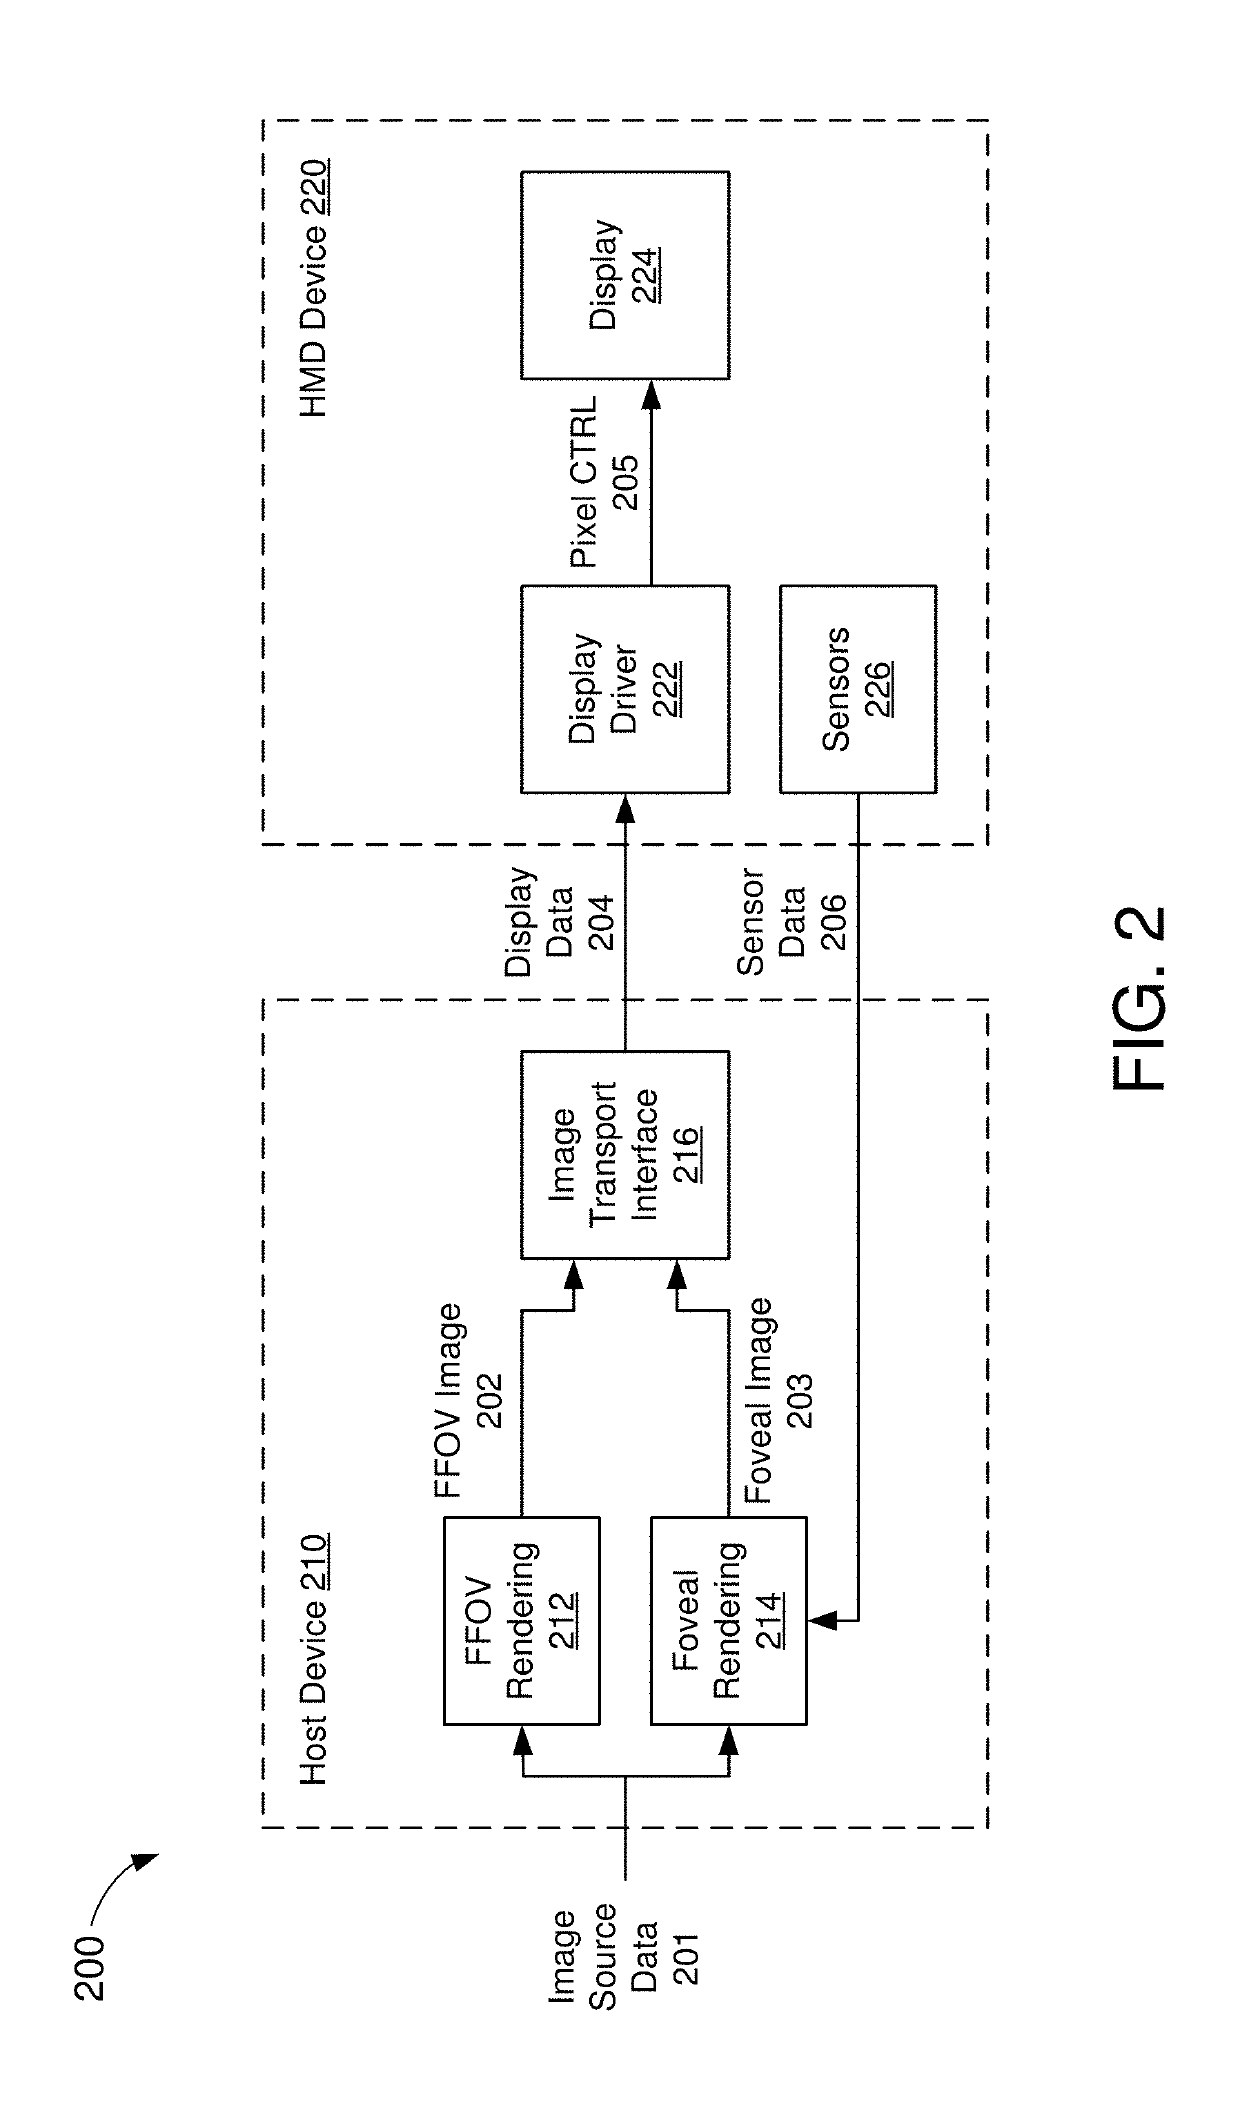 Display interface with foveal compression